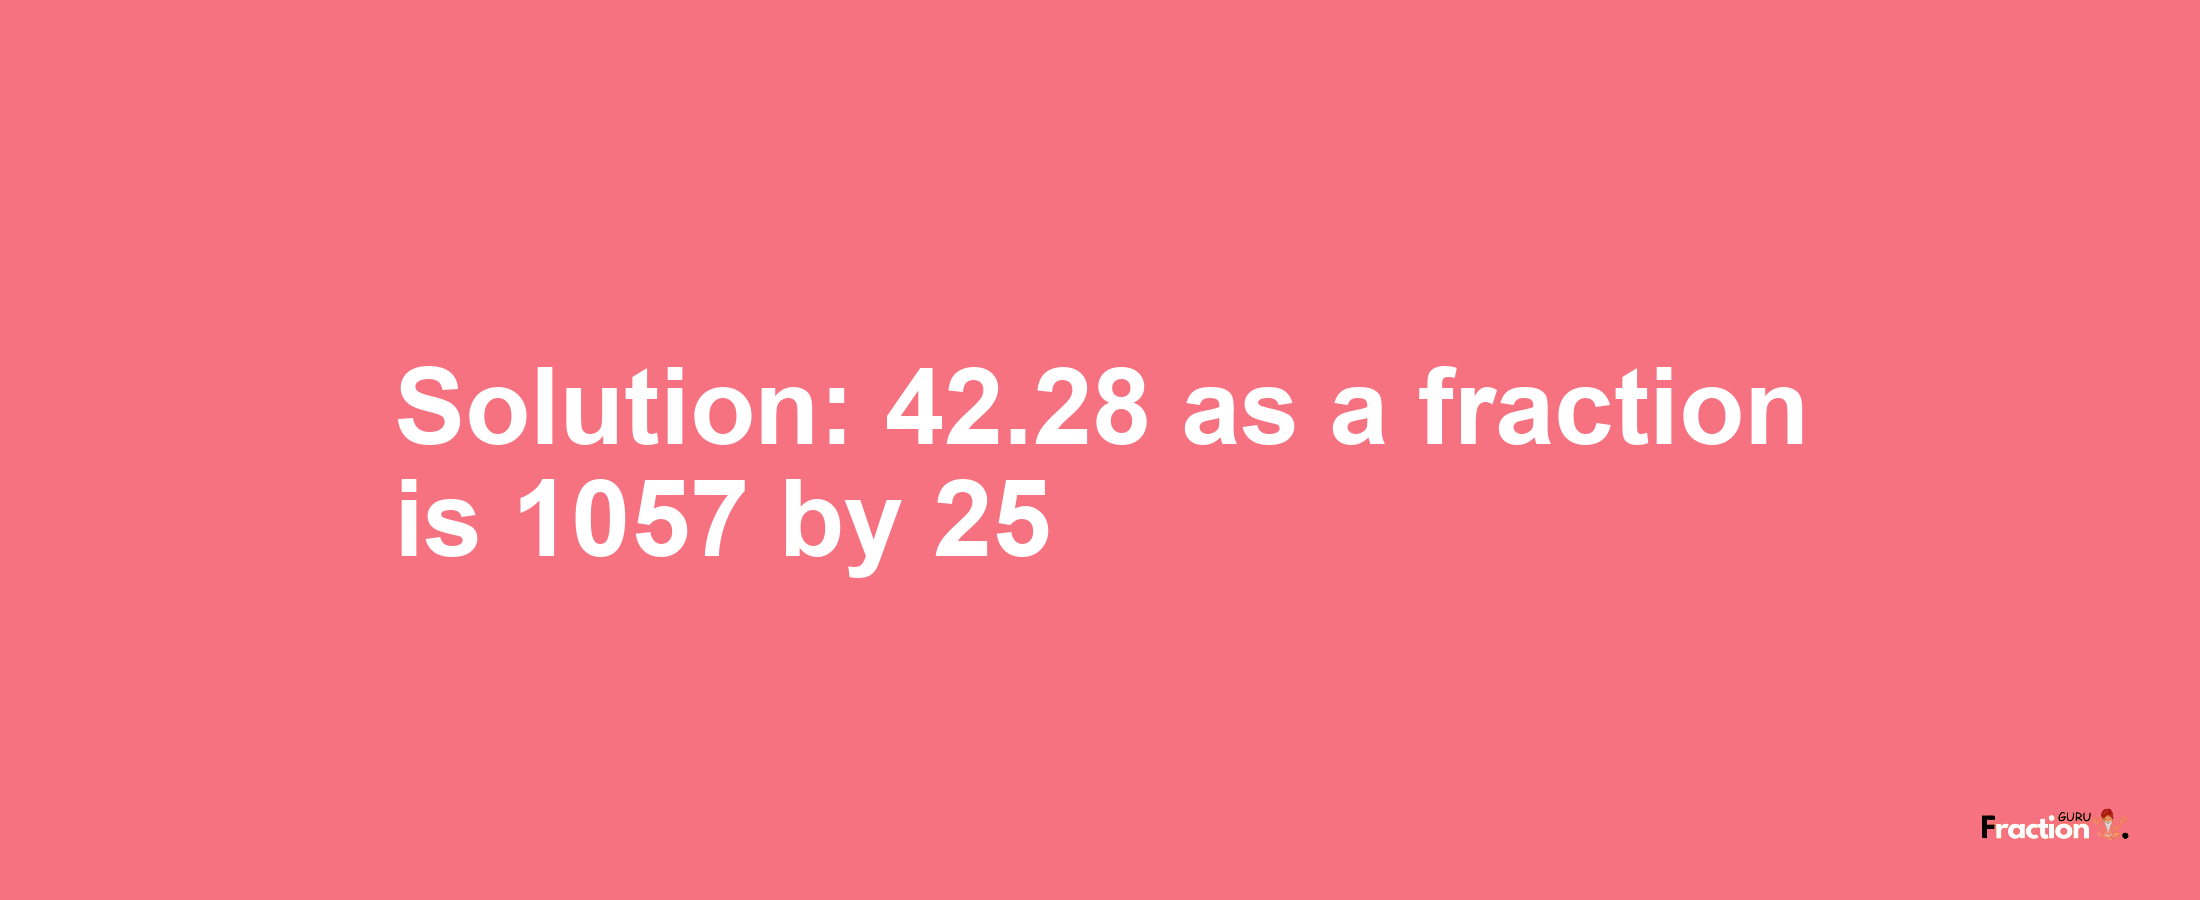 Solution:42.28 as a fraction is 1057/25